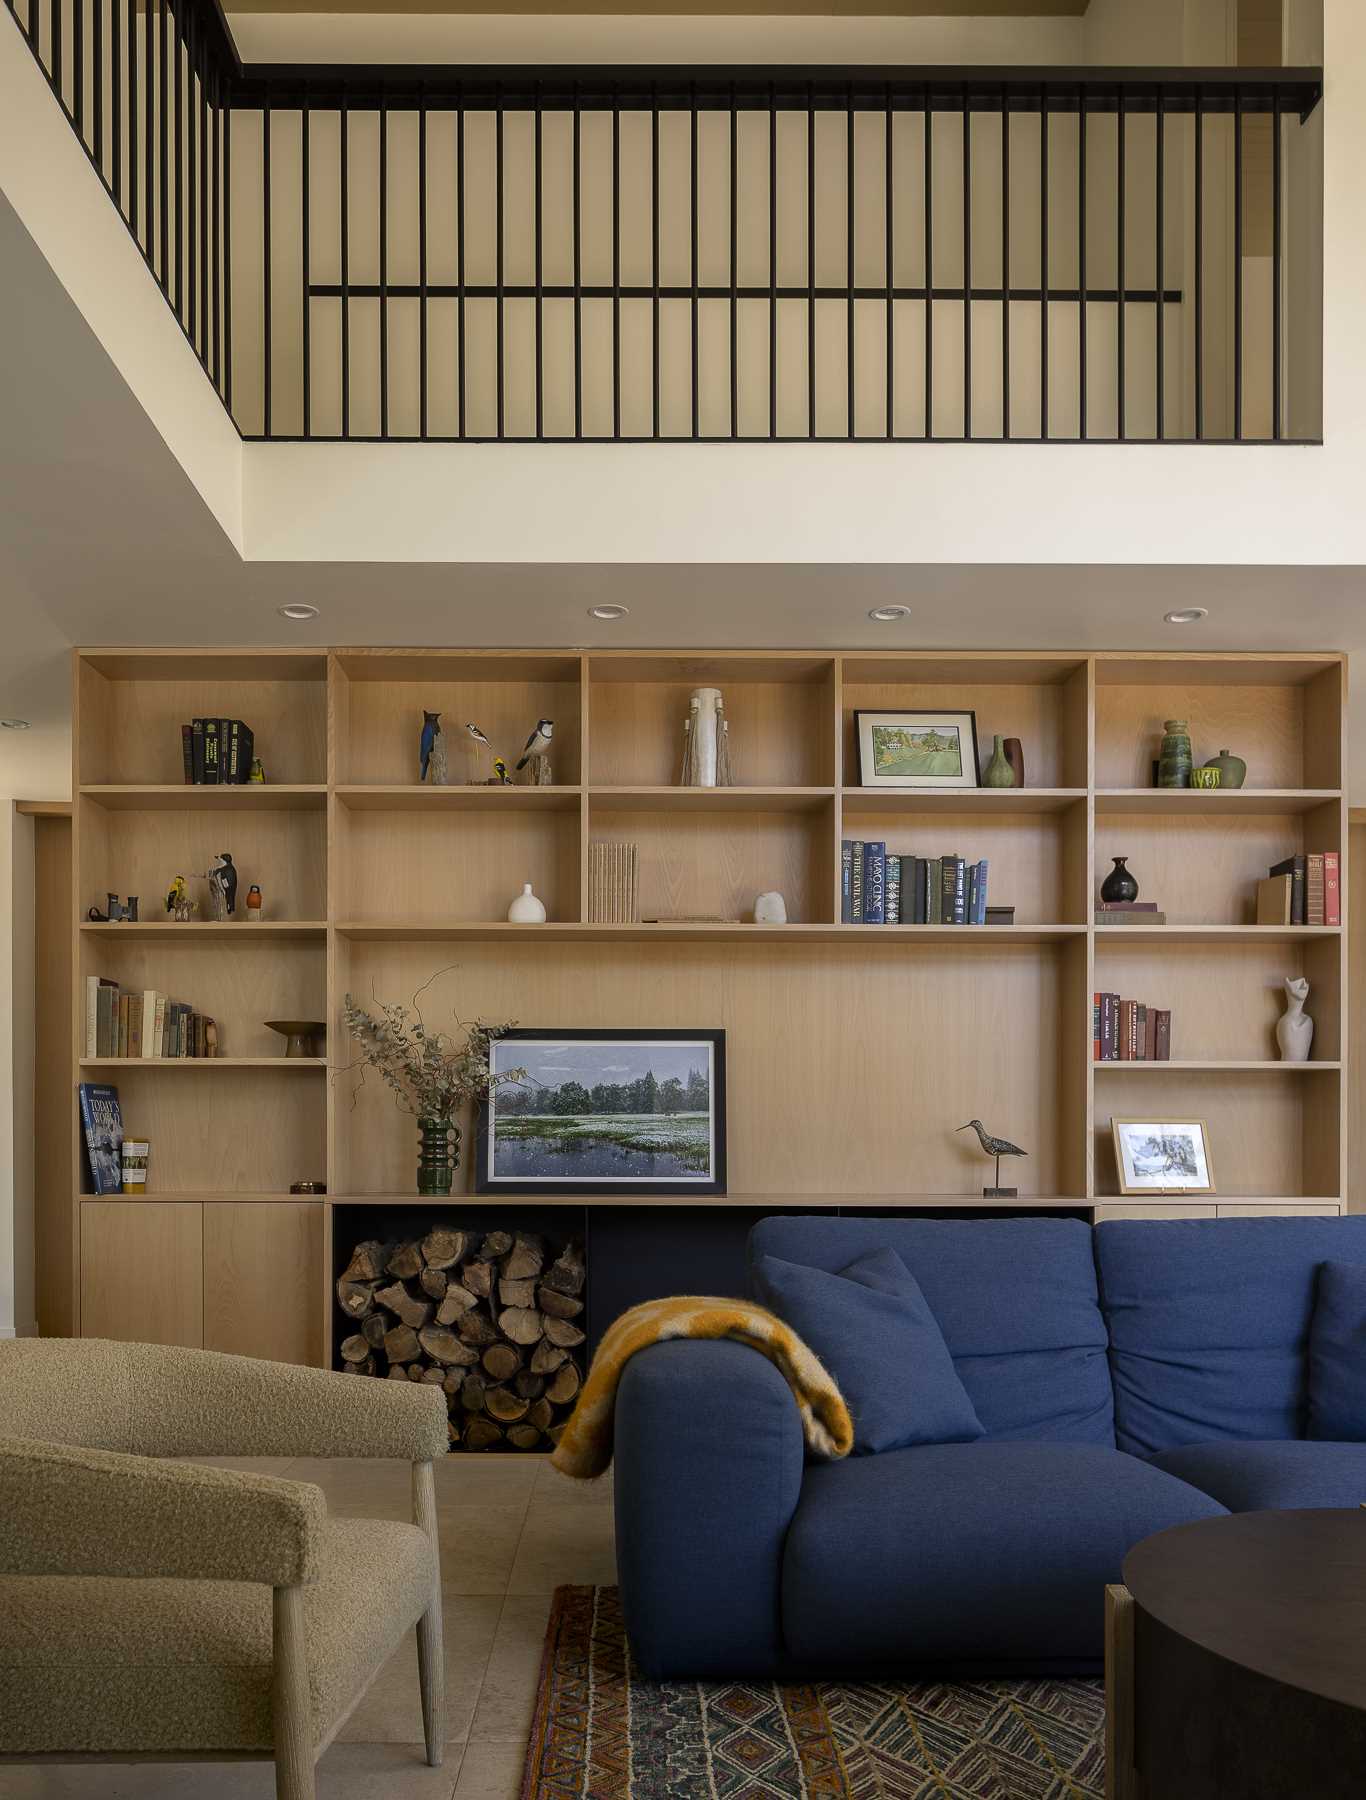 Behind the couch is a wall of custom built-in wood shelving for displaying decor and books.